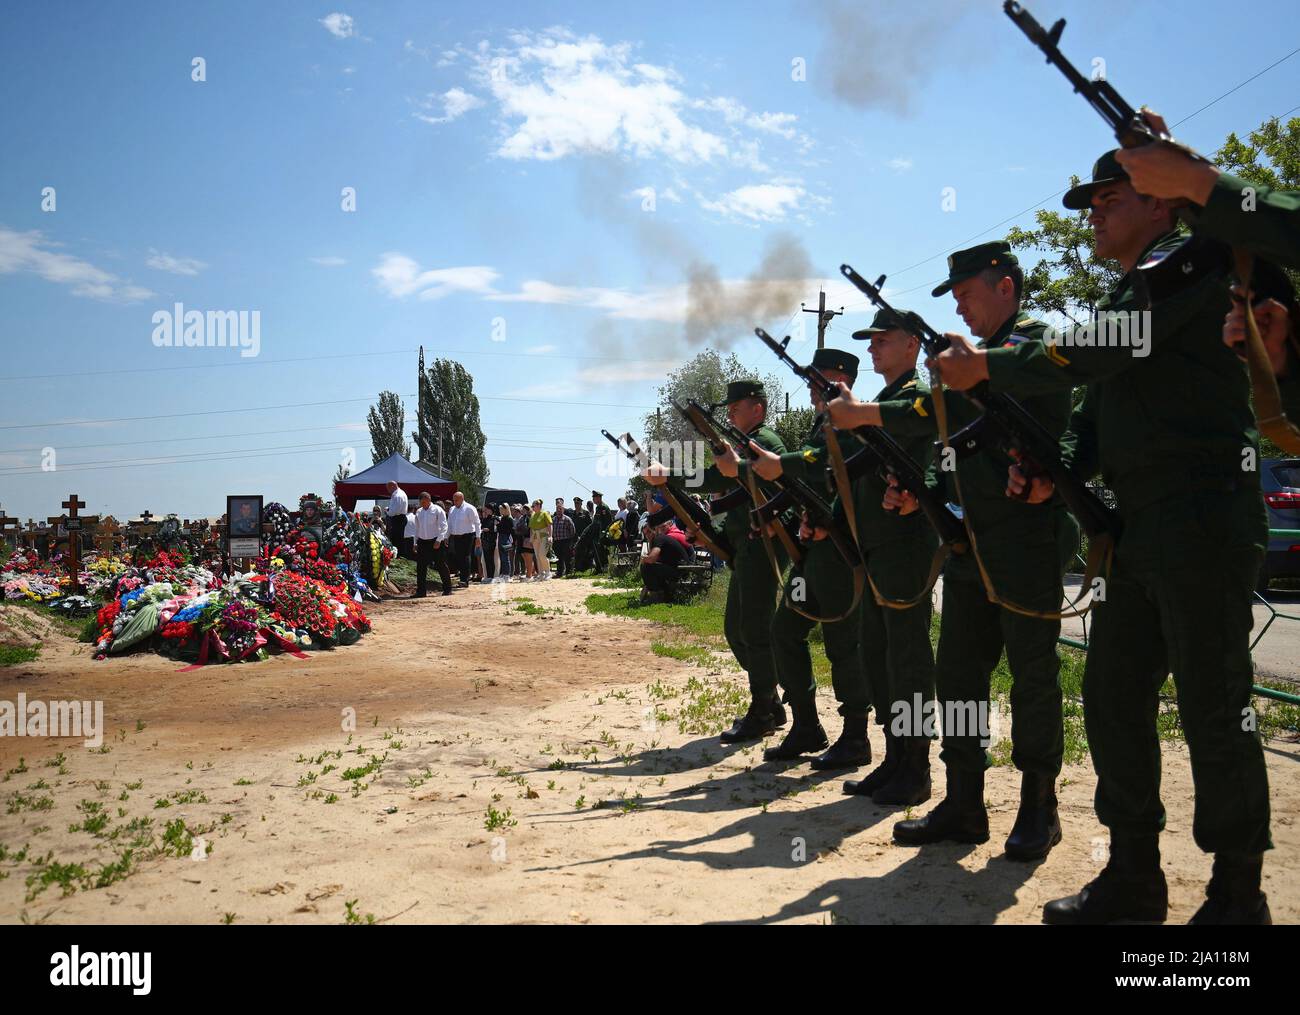 Servicemen fire a salute during a funeral of Russian army sapper Danil Dumenko, who was killed during the military conflict in Ukraine, at a cemetery in Volzhsky, Russia May 26, 2022. REUTERS/REUTERS PHOTOGRAPHER Stock Photo